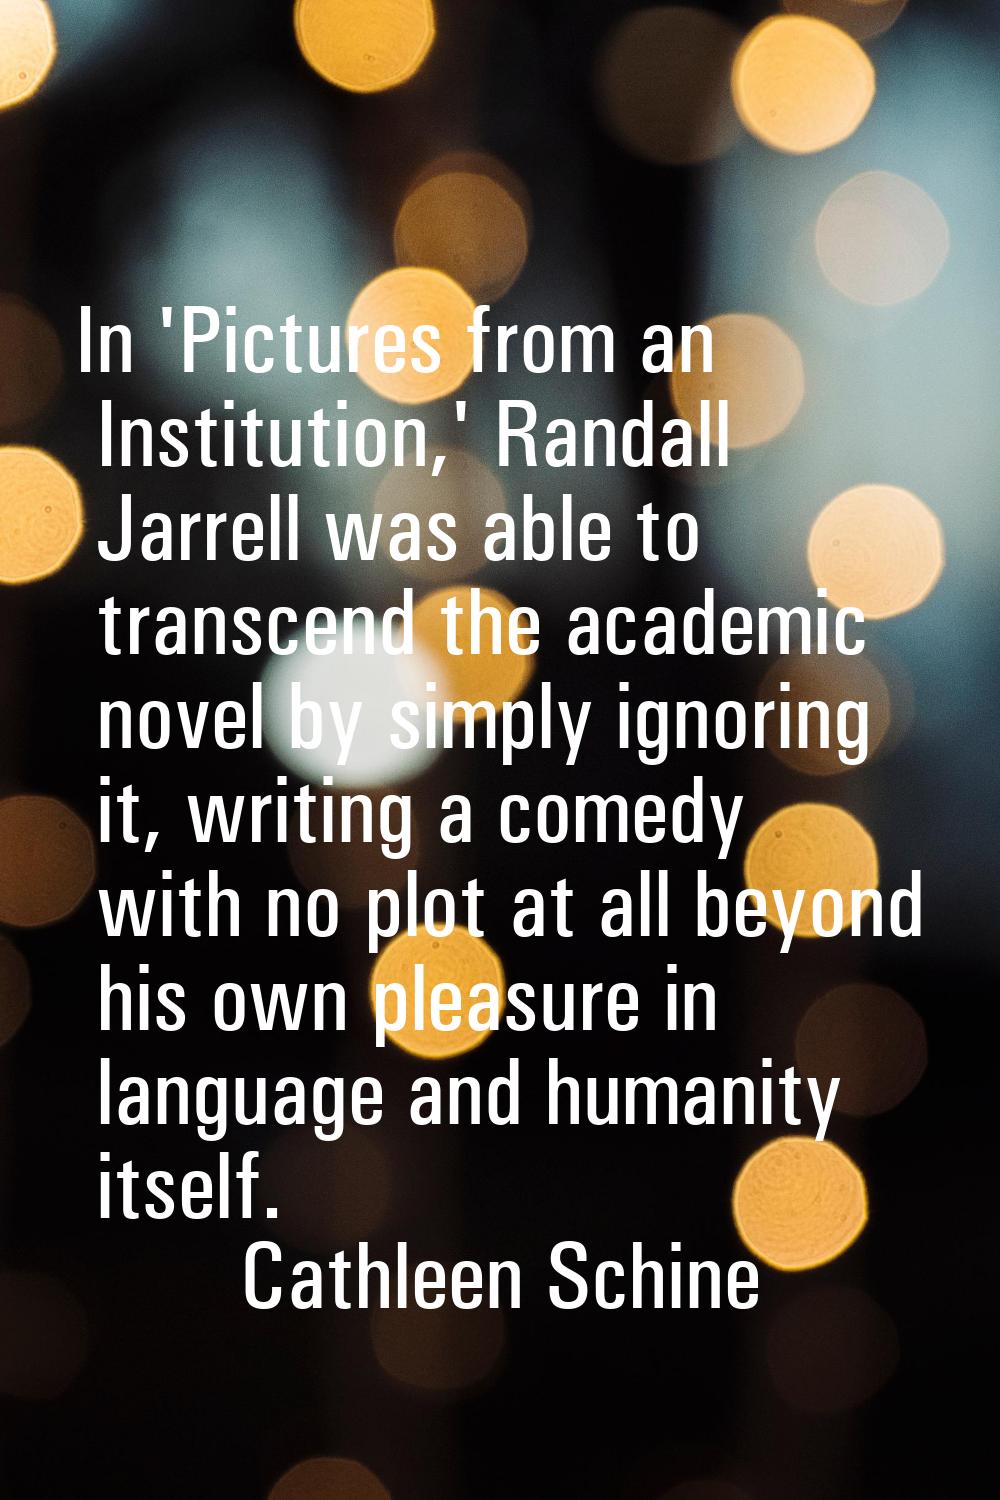 In 'Pictures from an Institution,' Randall Jarrell was able to transcend the academic novel by simp